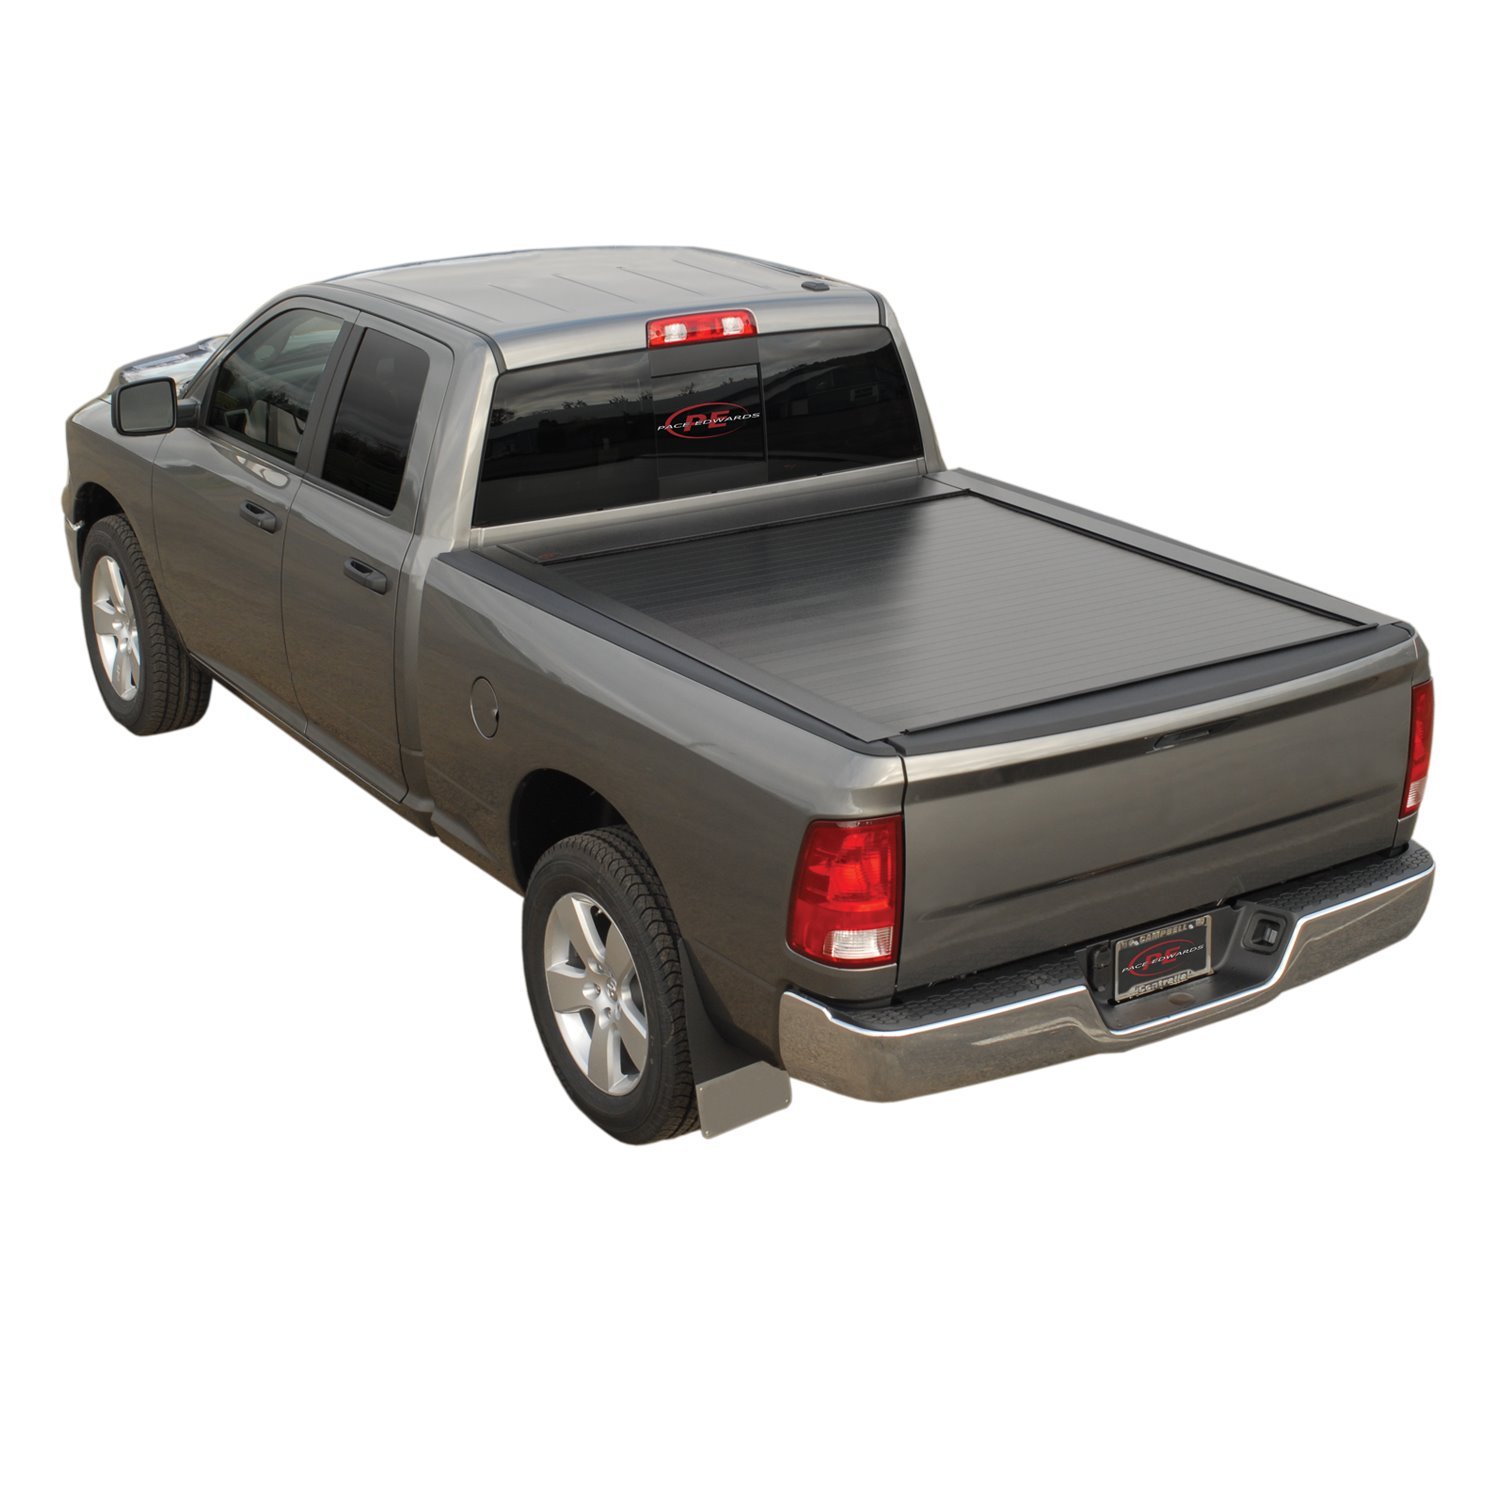 BLF171 Bedlocker Tonneau Cover Kit for 2021 Ford F-150, 2022-2023 Ford F-150